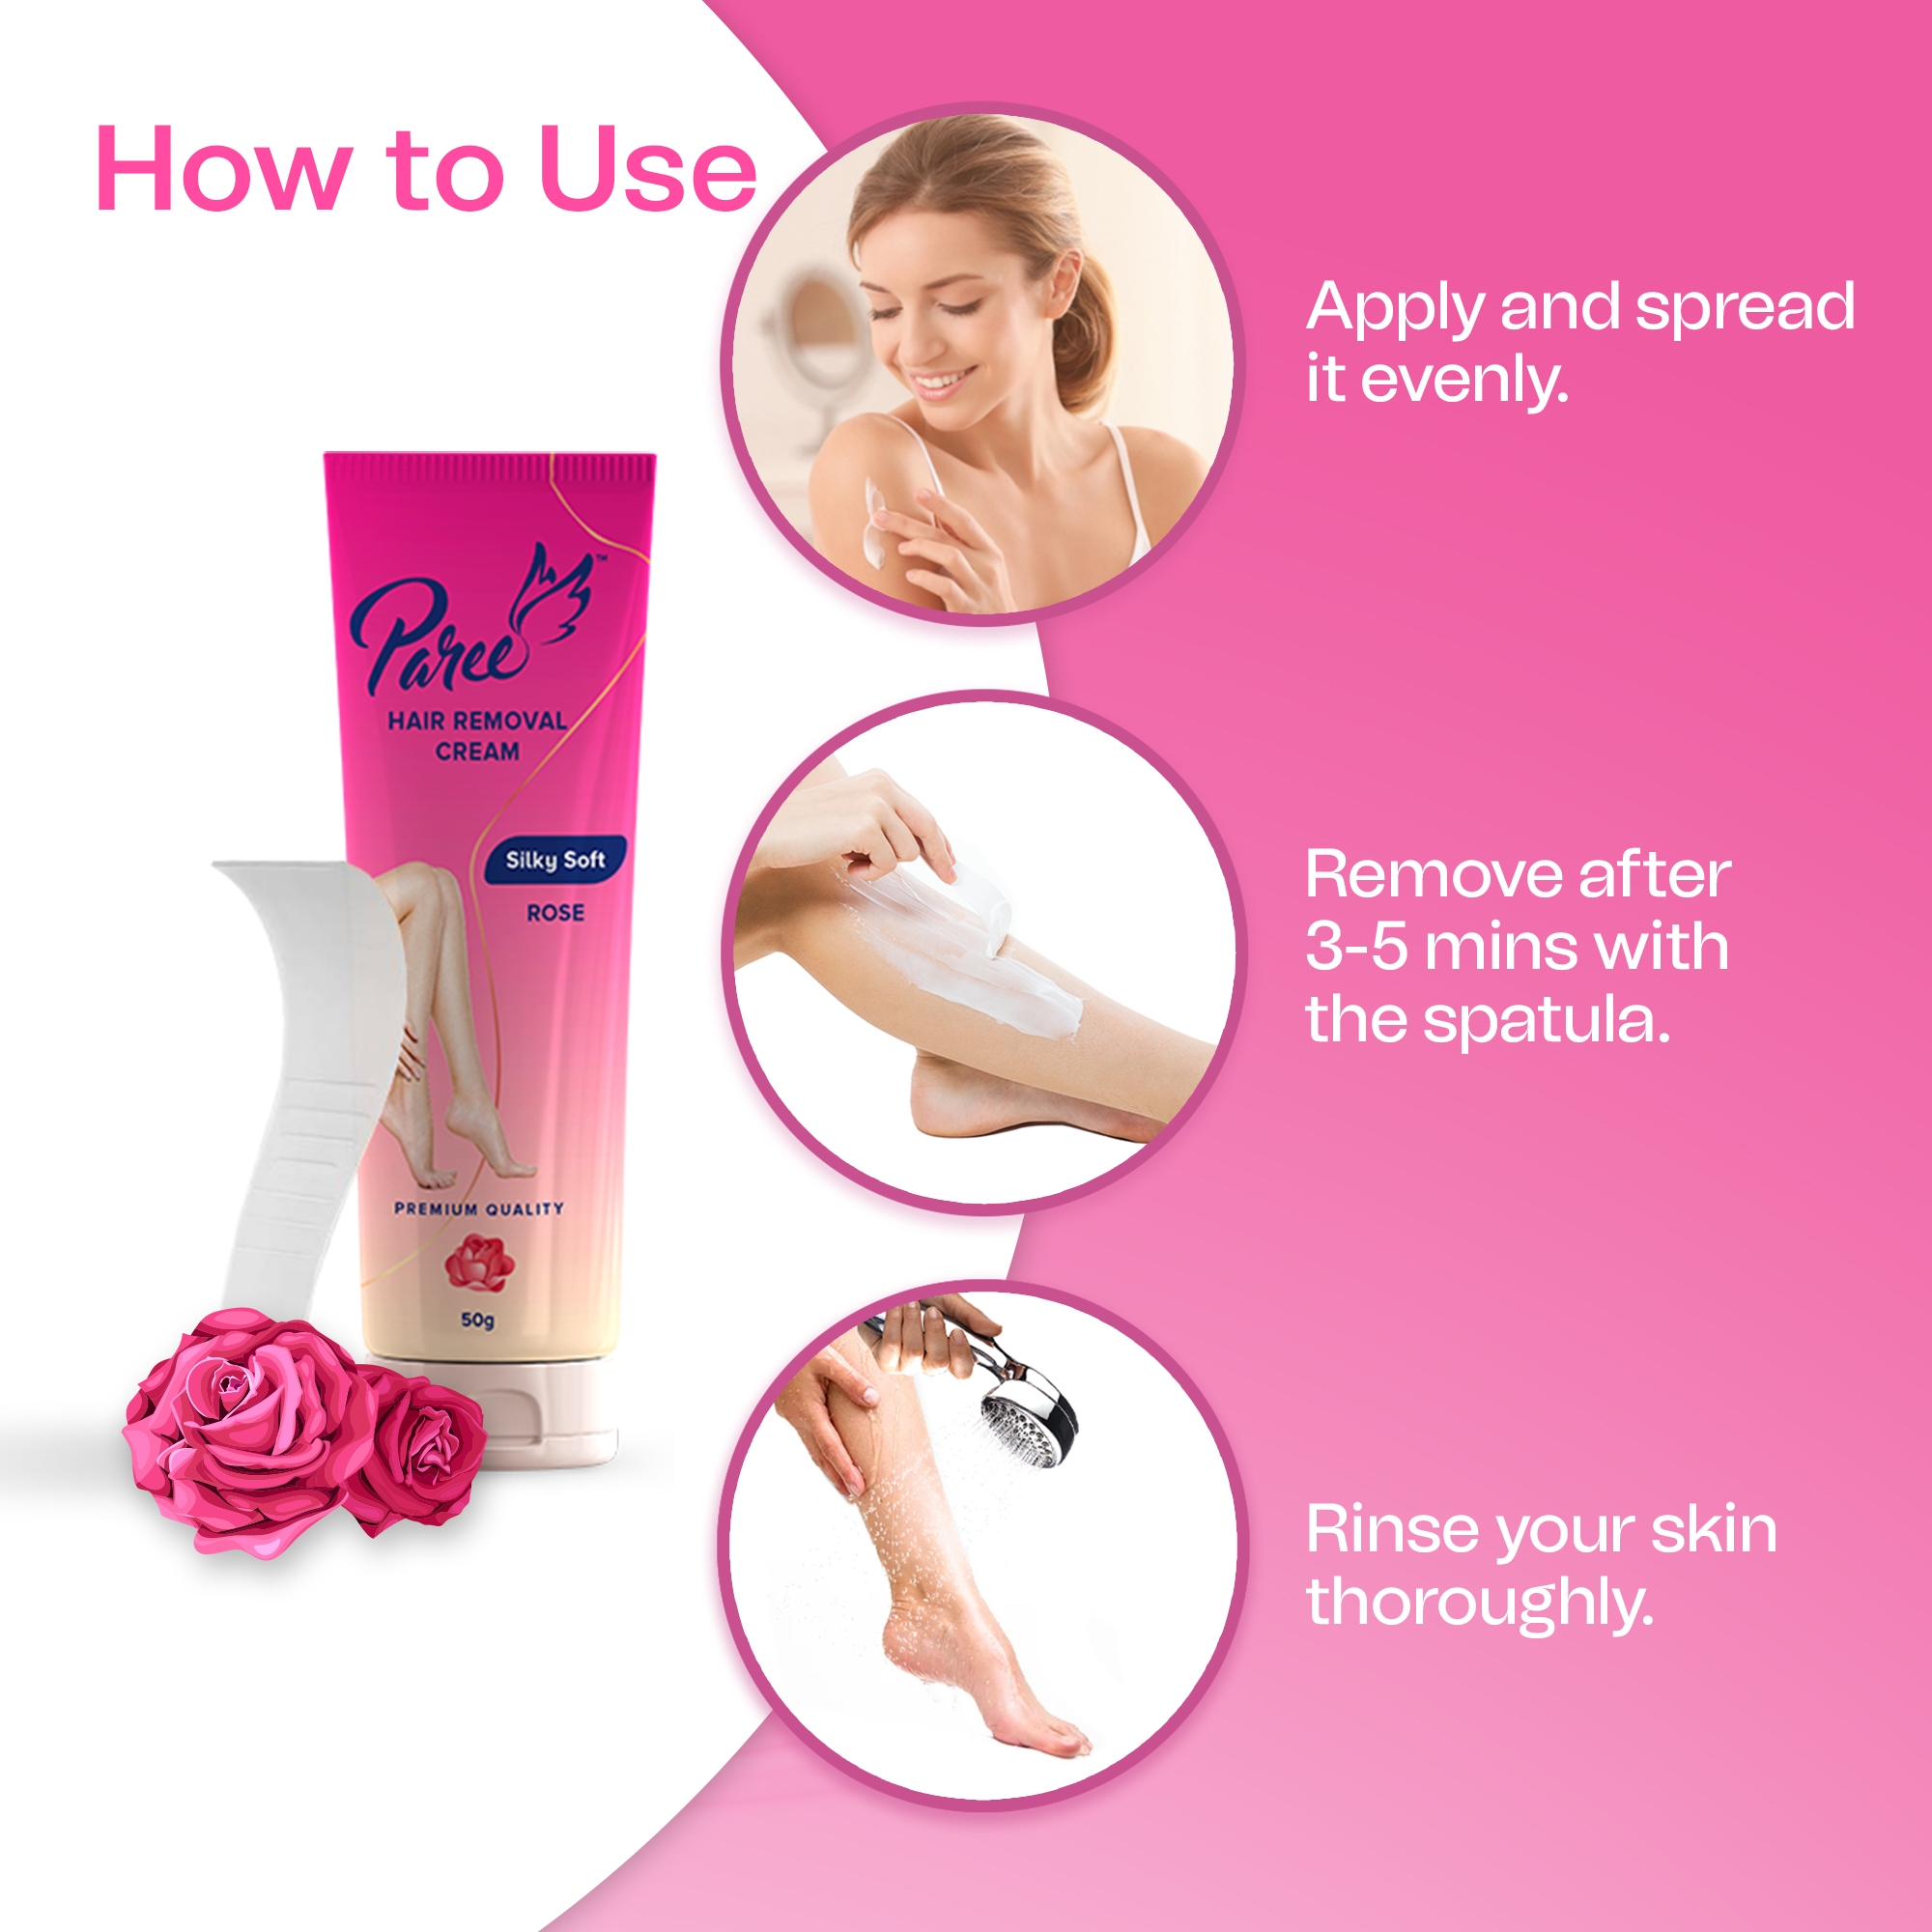 https://cdn.fynd.com/v2/falling-surf-7c8bb8/fyprod/wrkr/products/pictures/item/free/original/RPiuN28wp-Paree-Hair-Removal-Cream-Silky-Soft-With-Rose-(50g)-or-For-Sensitive-Skin.jpeg